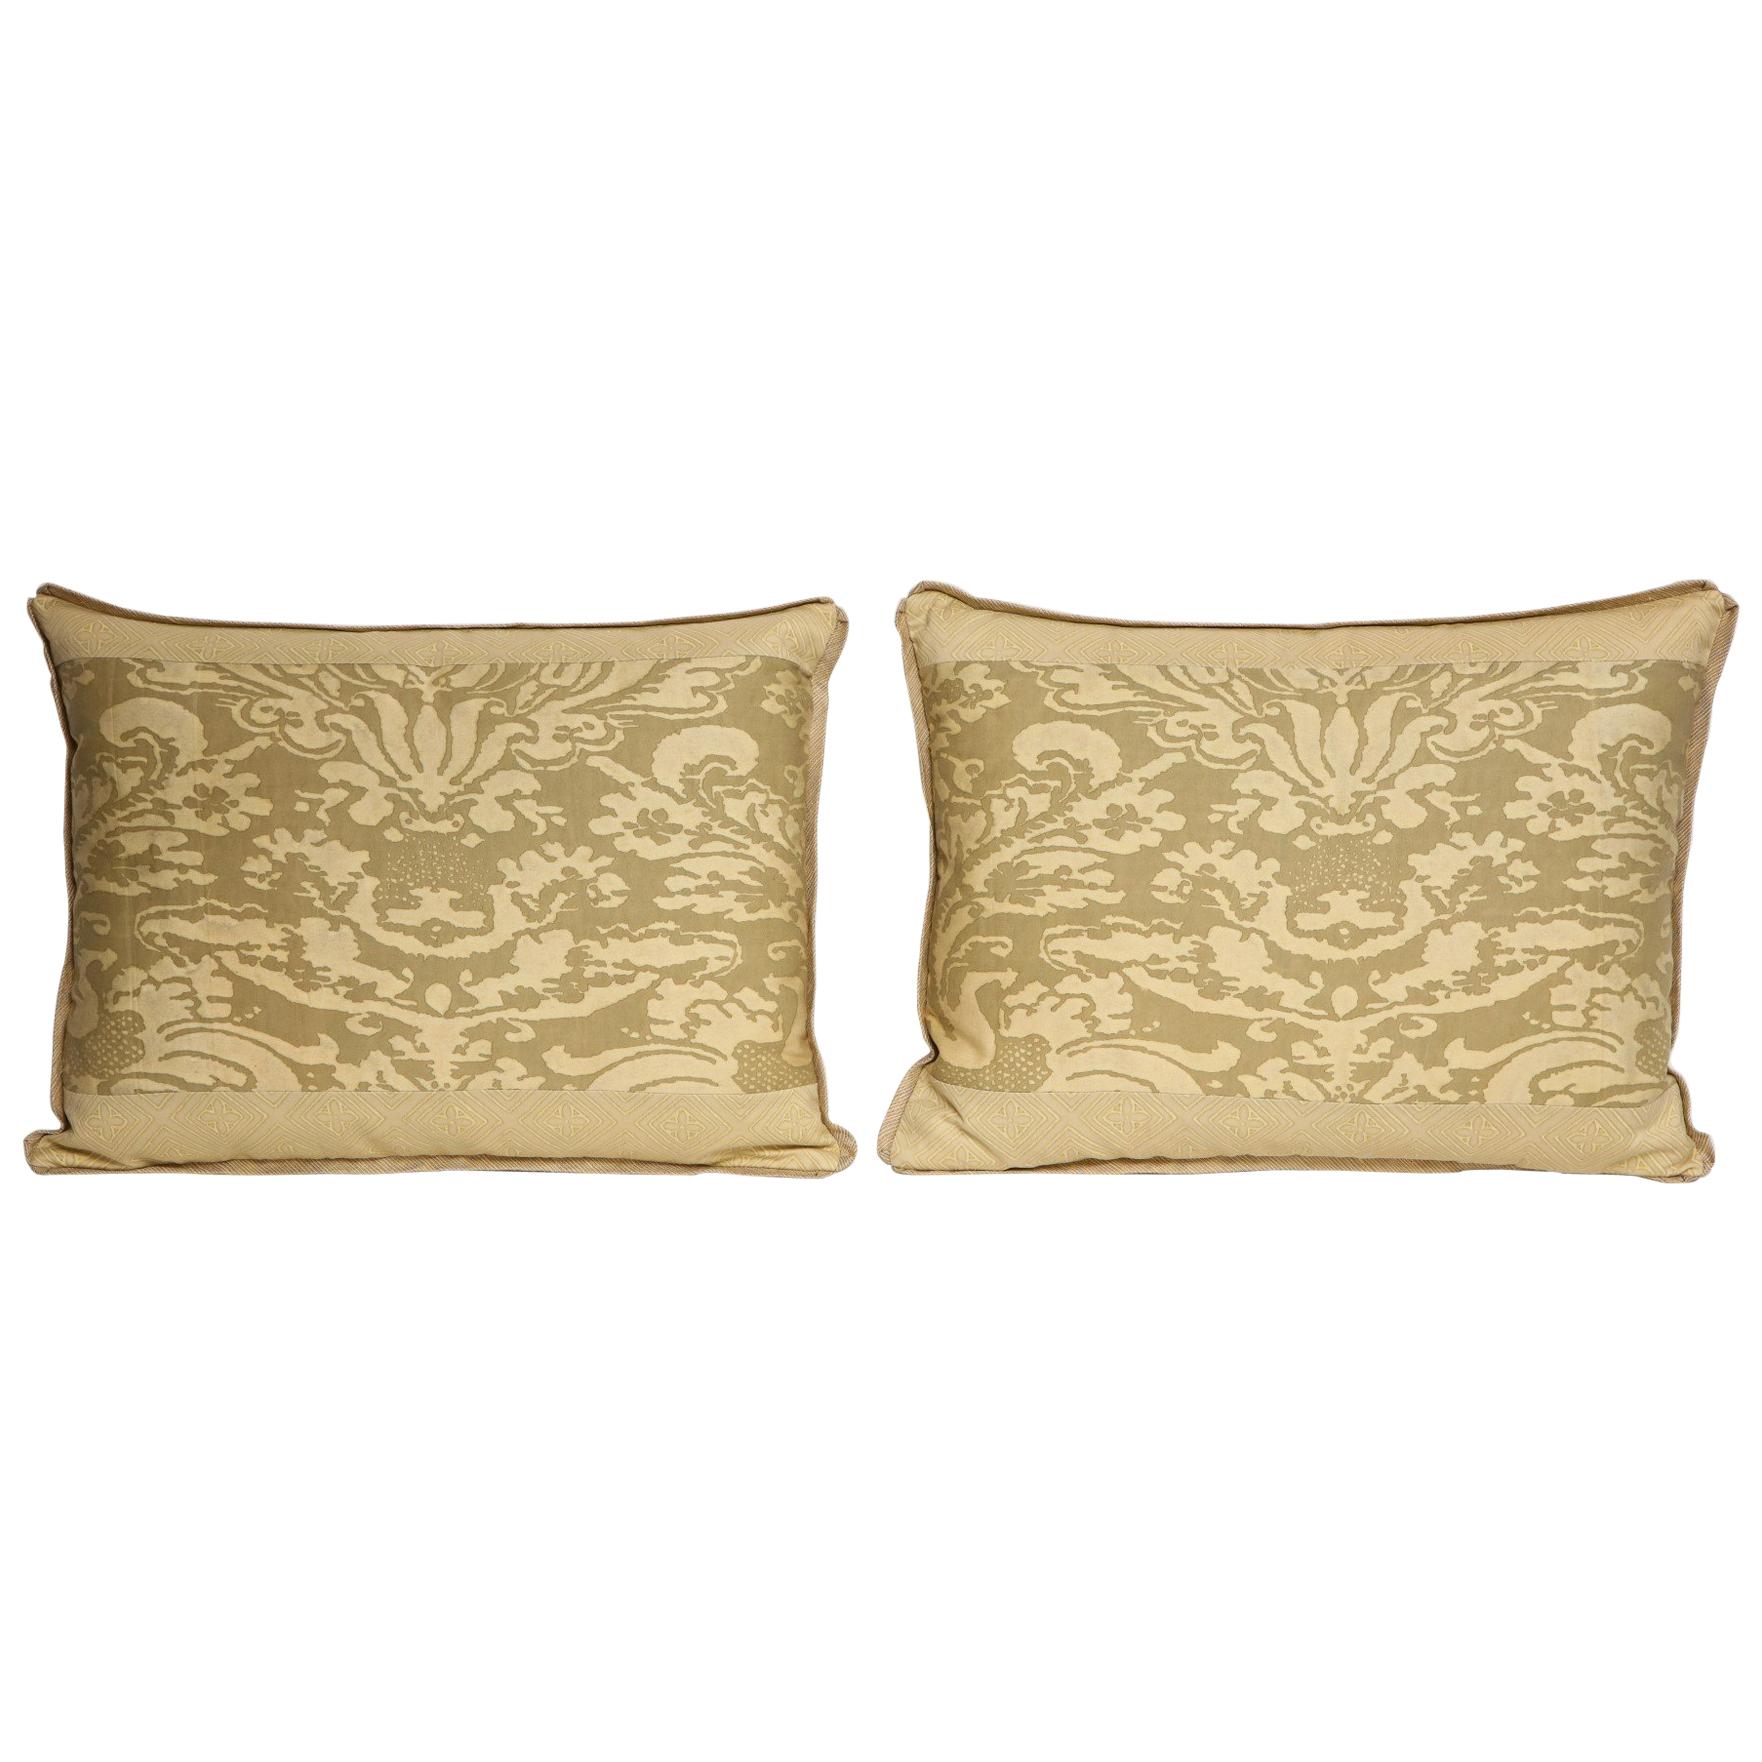 Pair of Fortuny Fabric Lumbar Cushions in the Lucrezia Pattern